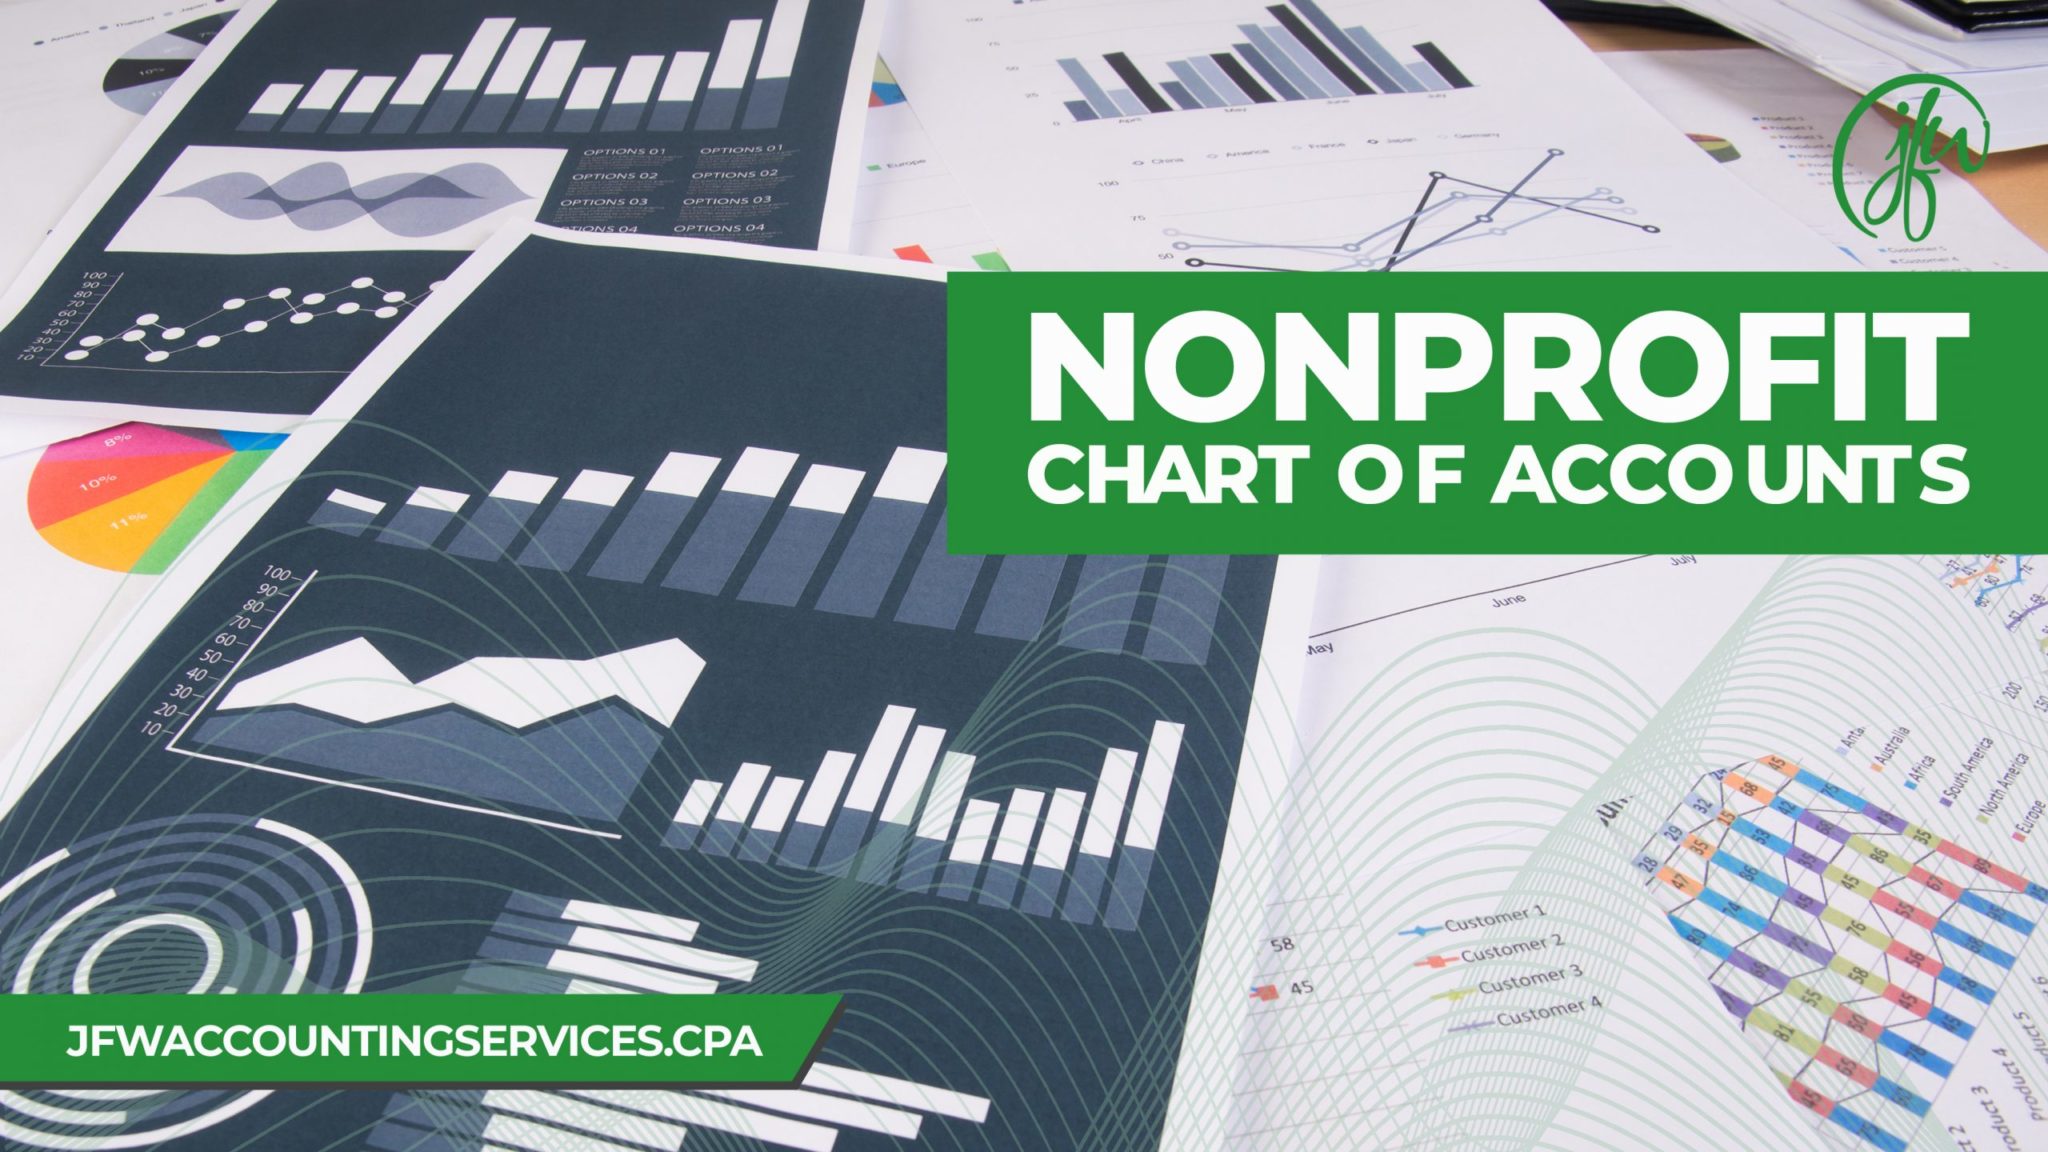 grow-your-nonprofit-organization-with-a-good-chart-of-accounts-help